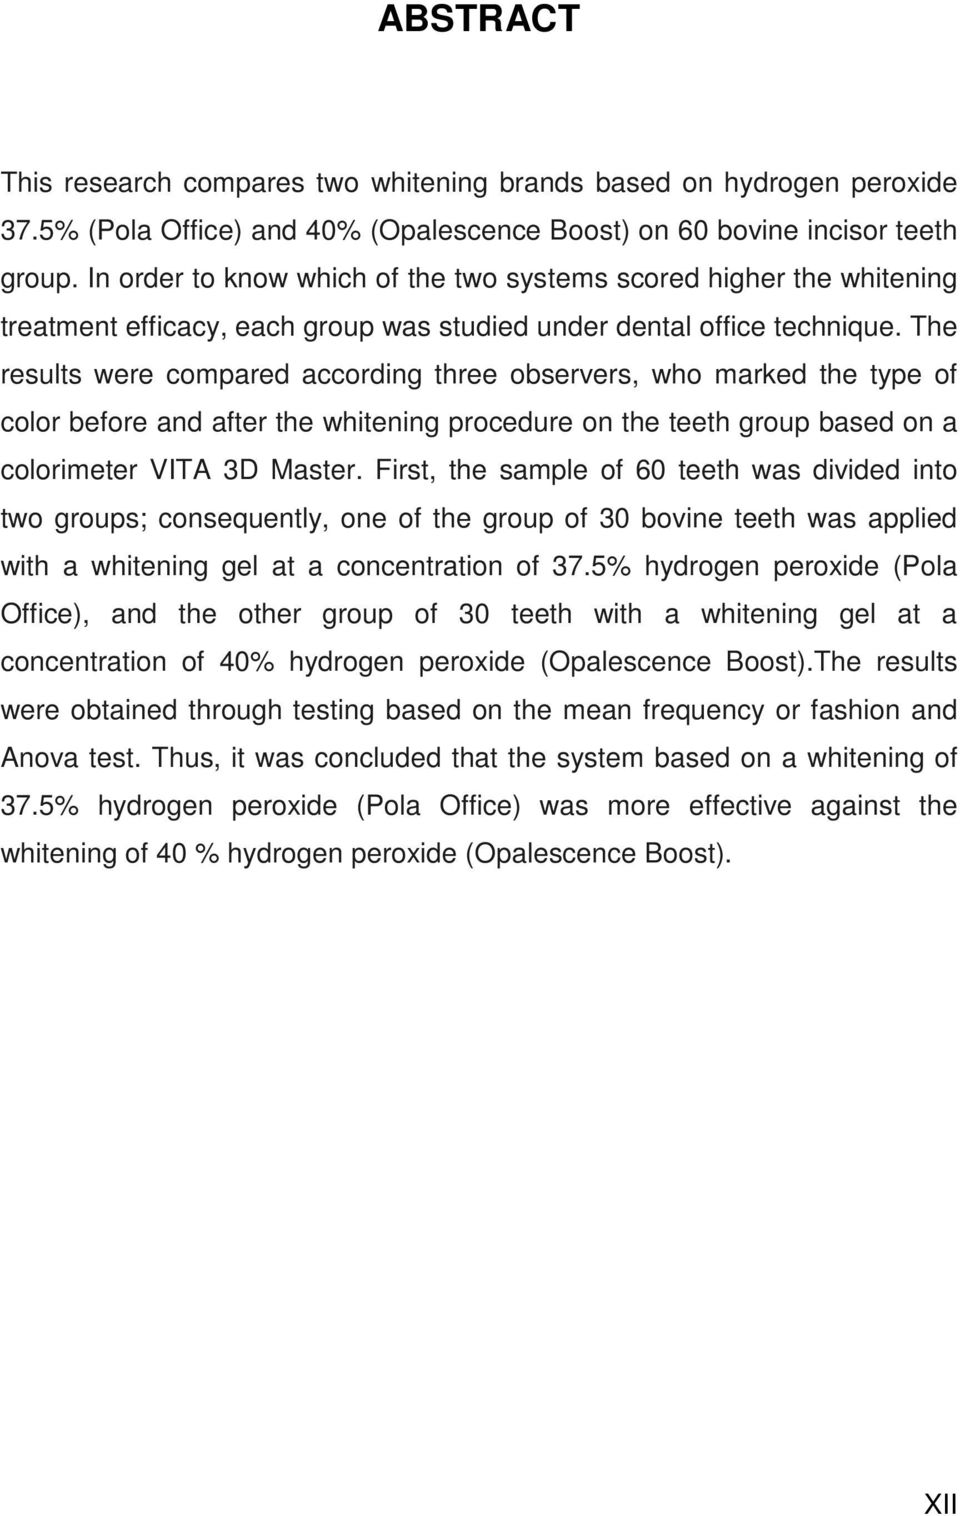 The results were compared according three observers, who marked the type of color before and after the whitening procedure on the teeth group based on a colorimeter VITA 3D Master.